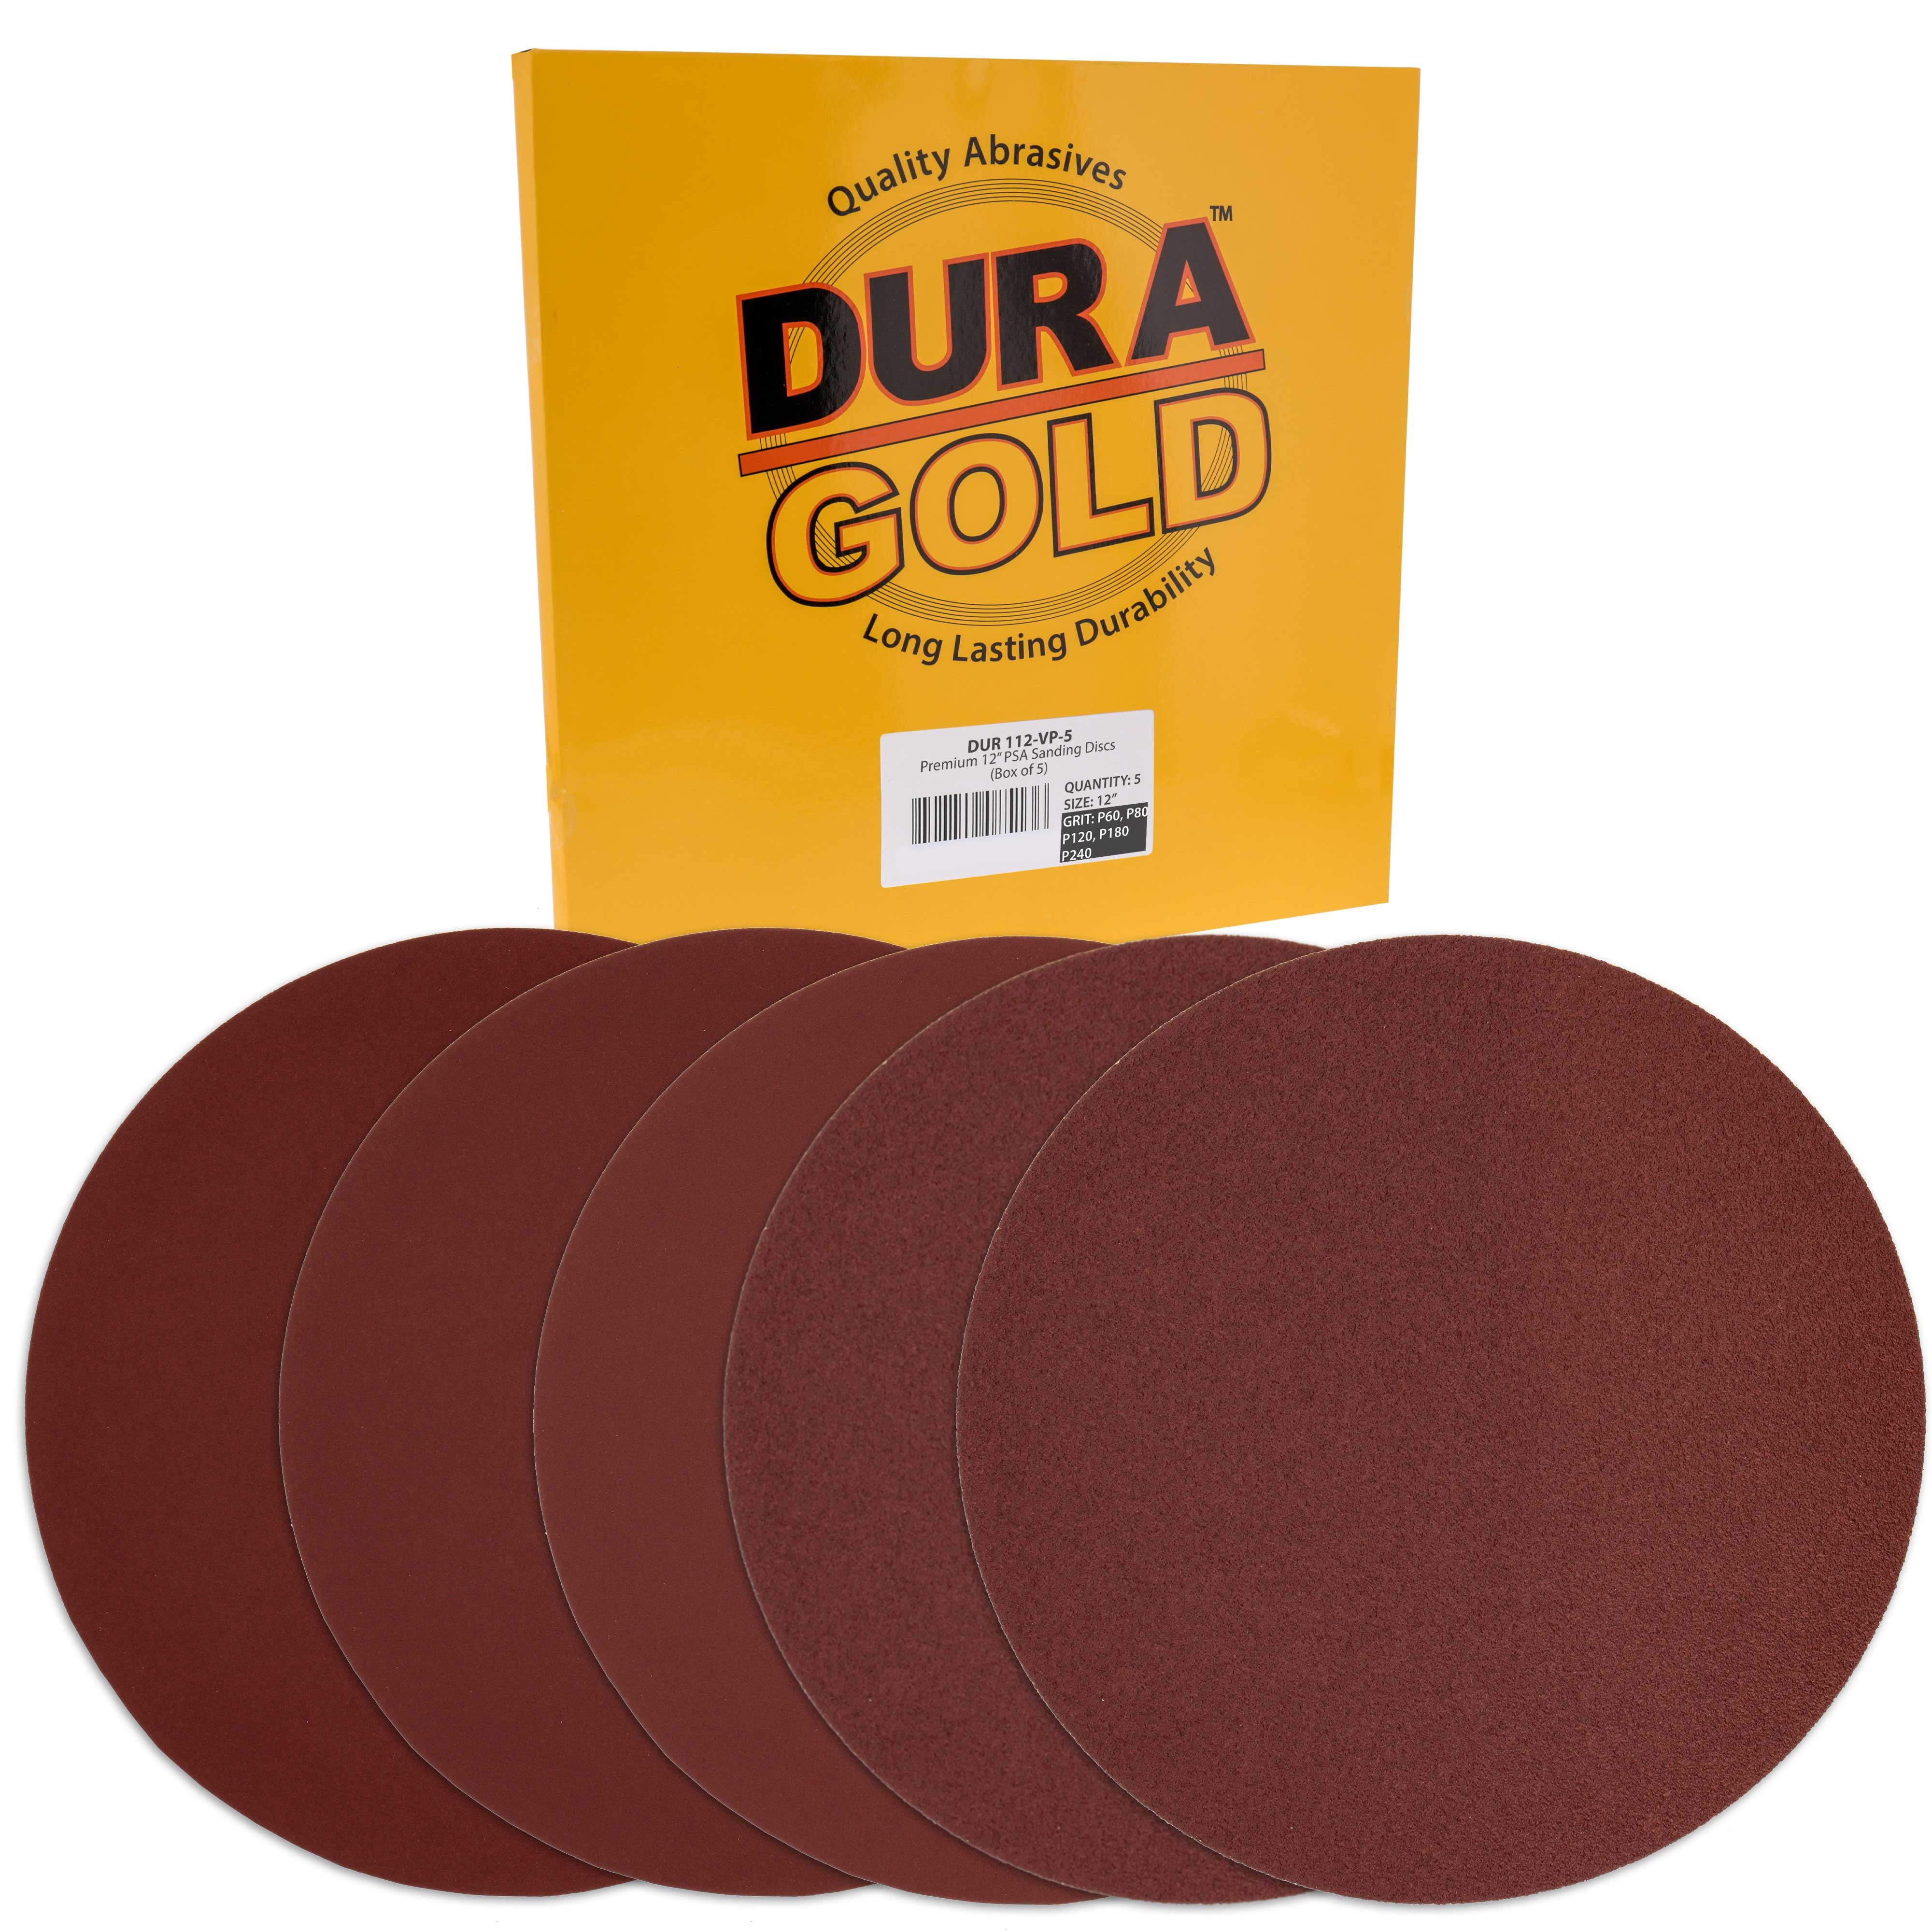 Box of 10 - 8 Hole Pattern Sandpaper Discs with Hook & Loop Backing Fast Cutting Aluminum Oxide Abrasive Sand Wood Dura-Gold Premium 9 Drywall Sanding Discs 60 Grit For Drywall Power Sander